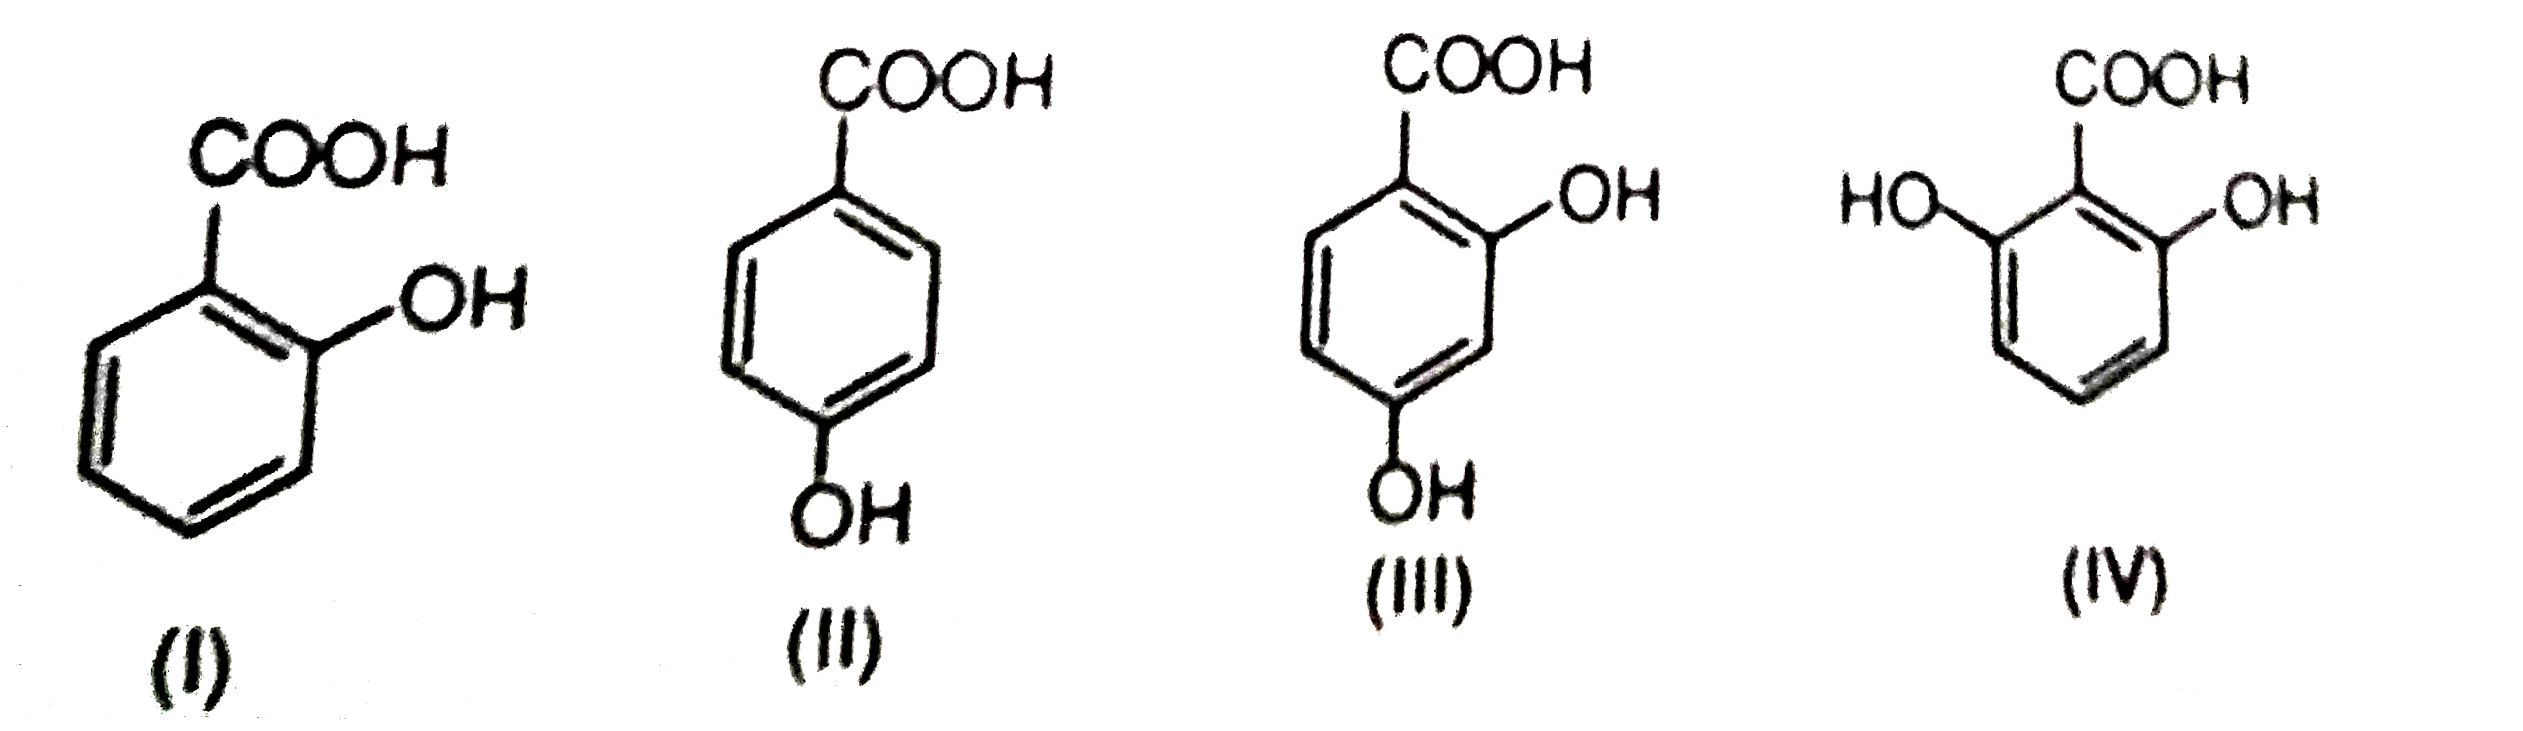 The order of pK(a) values of the following acids is